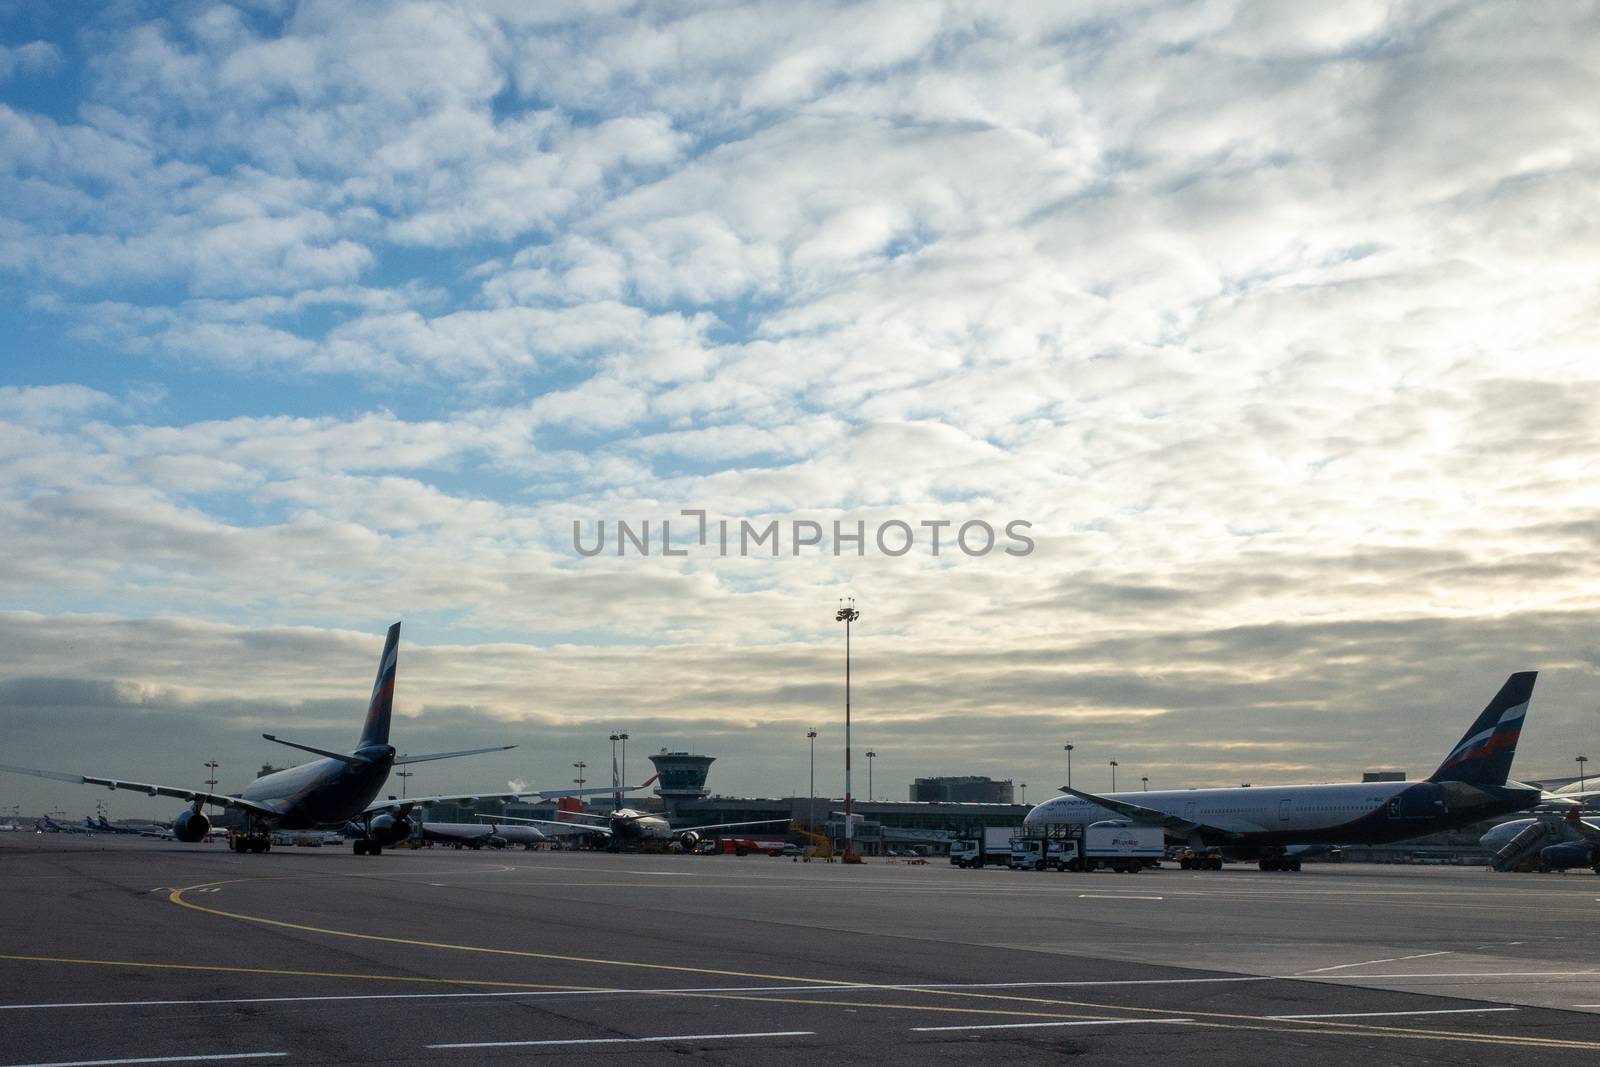 October 29, 2019, Moscow, Russia. Planes Aeroflot - Russian Airlines  at the Sheremetyevo International Airport in Moscow.